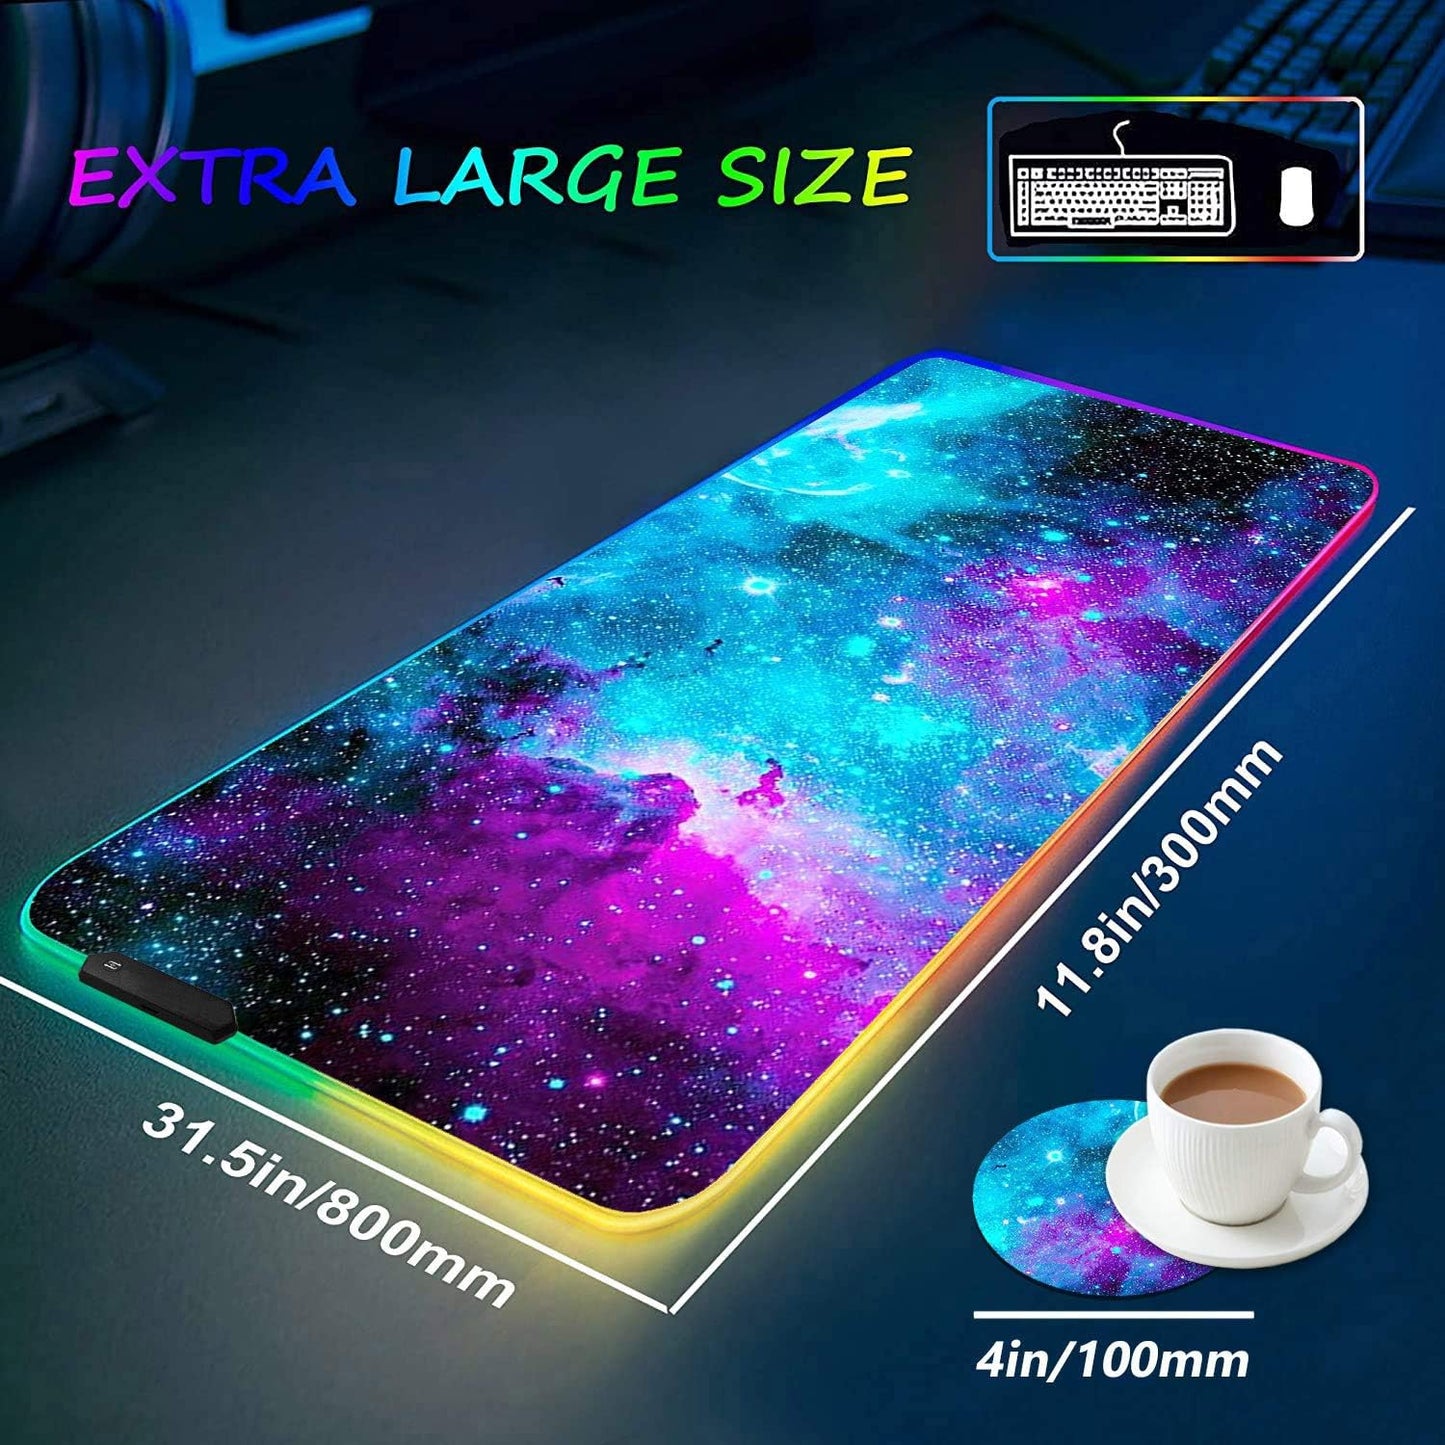 RGB Gaming Mouse Pad with Coffee Coaster, XXL Large Glowing LED Mousepad, Anti-Slip Rubber Base, Computer Keyboard Desk Mouse Mat 31.5 X 11.8 Inch - Blue Galaxy Nebula Universe Space